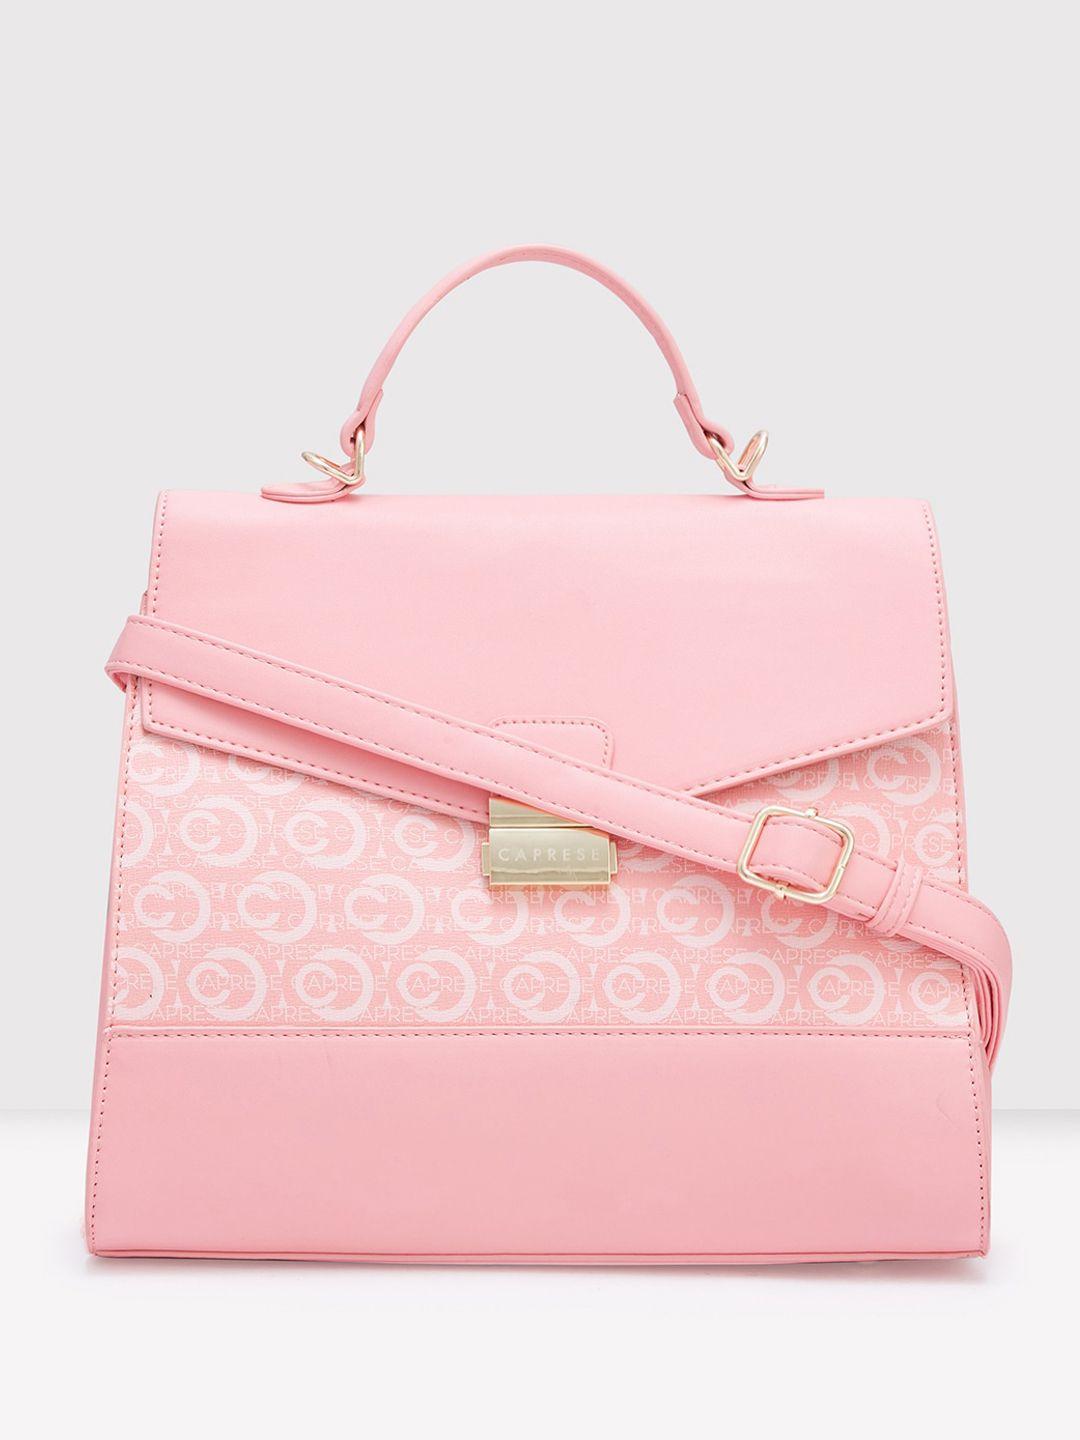 caprese printed leather structured satchel bag